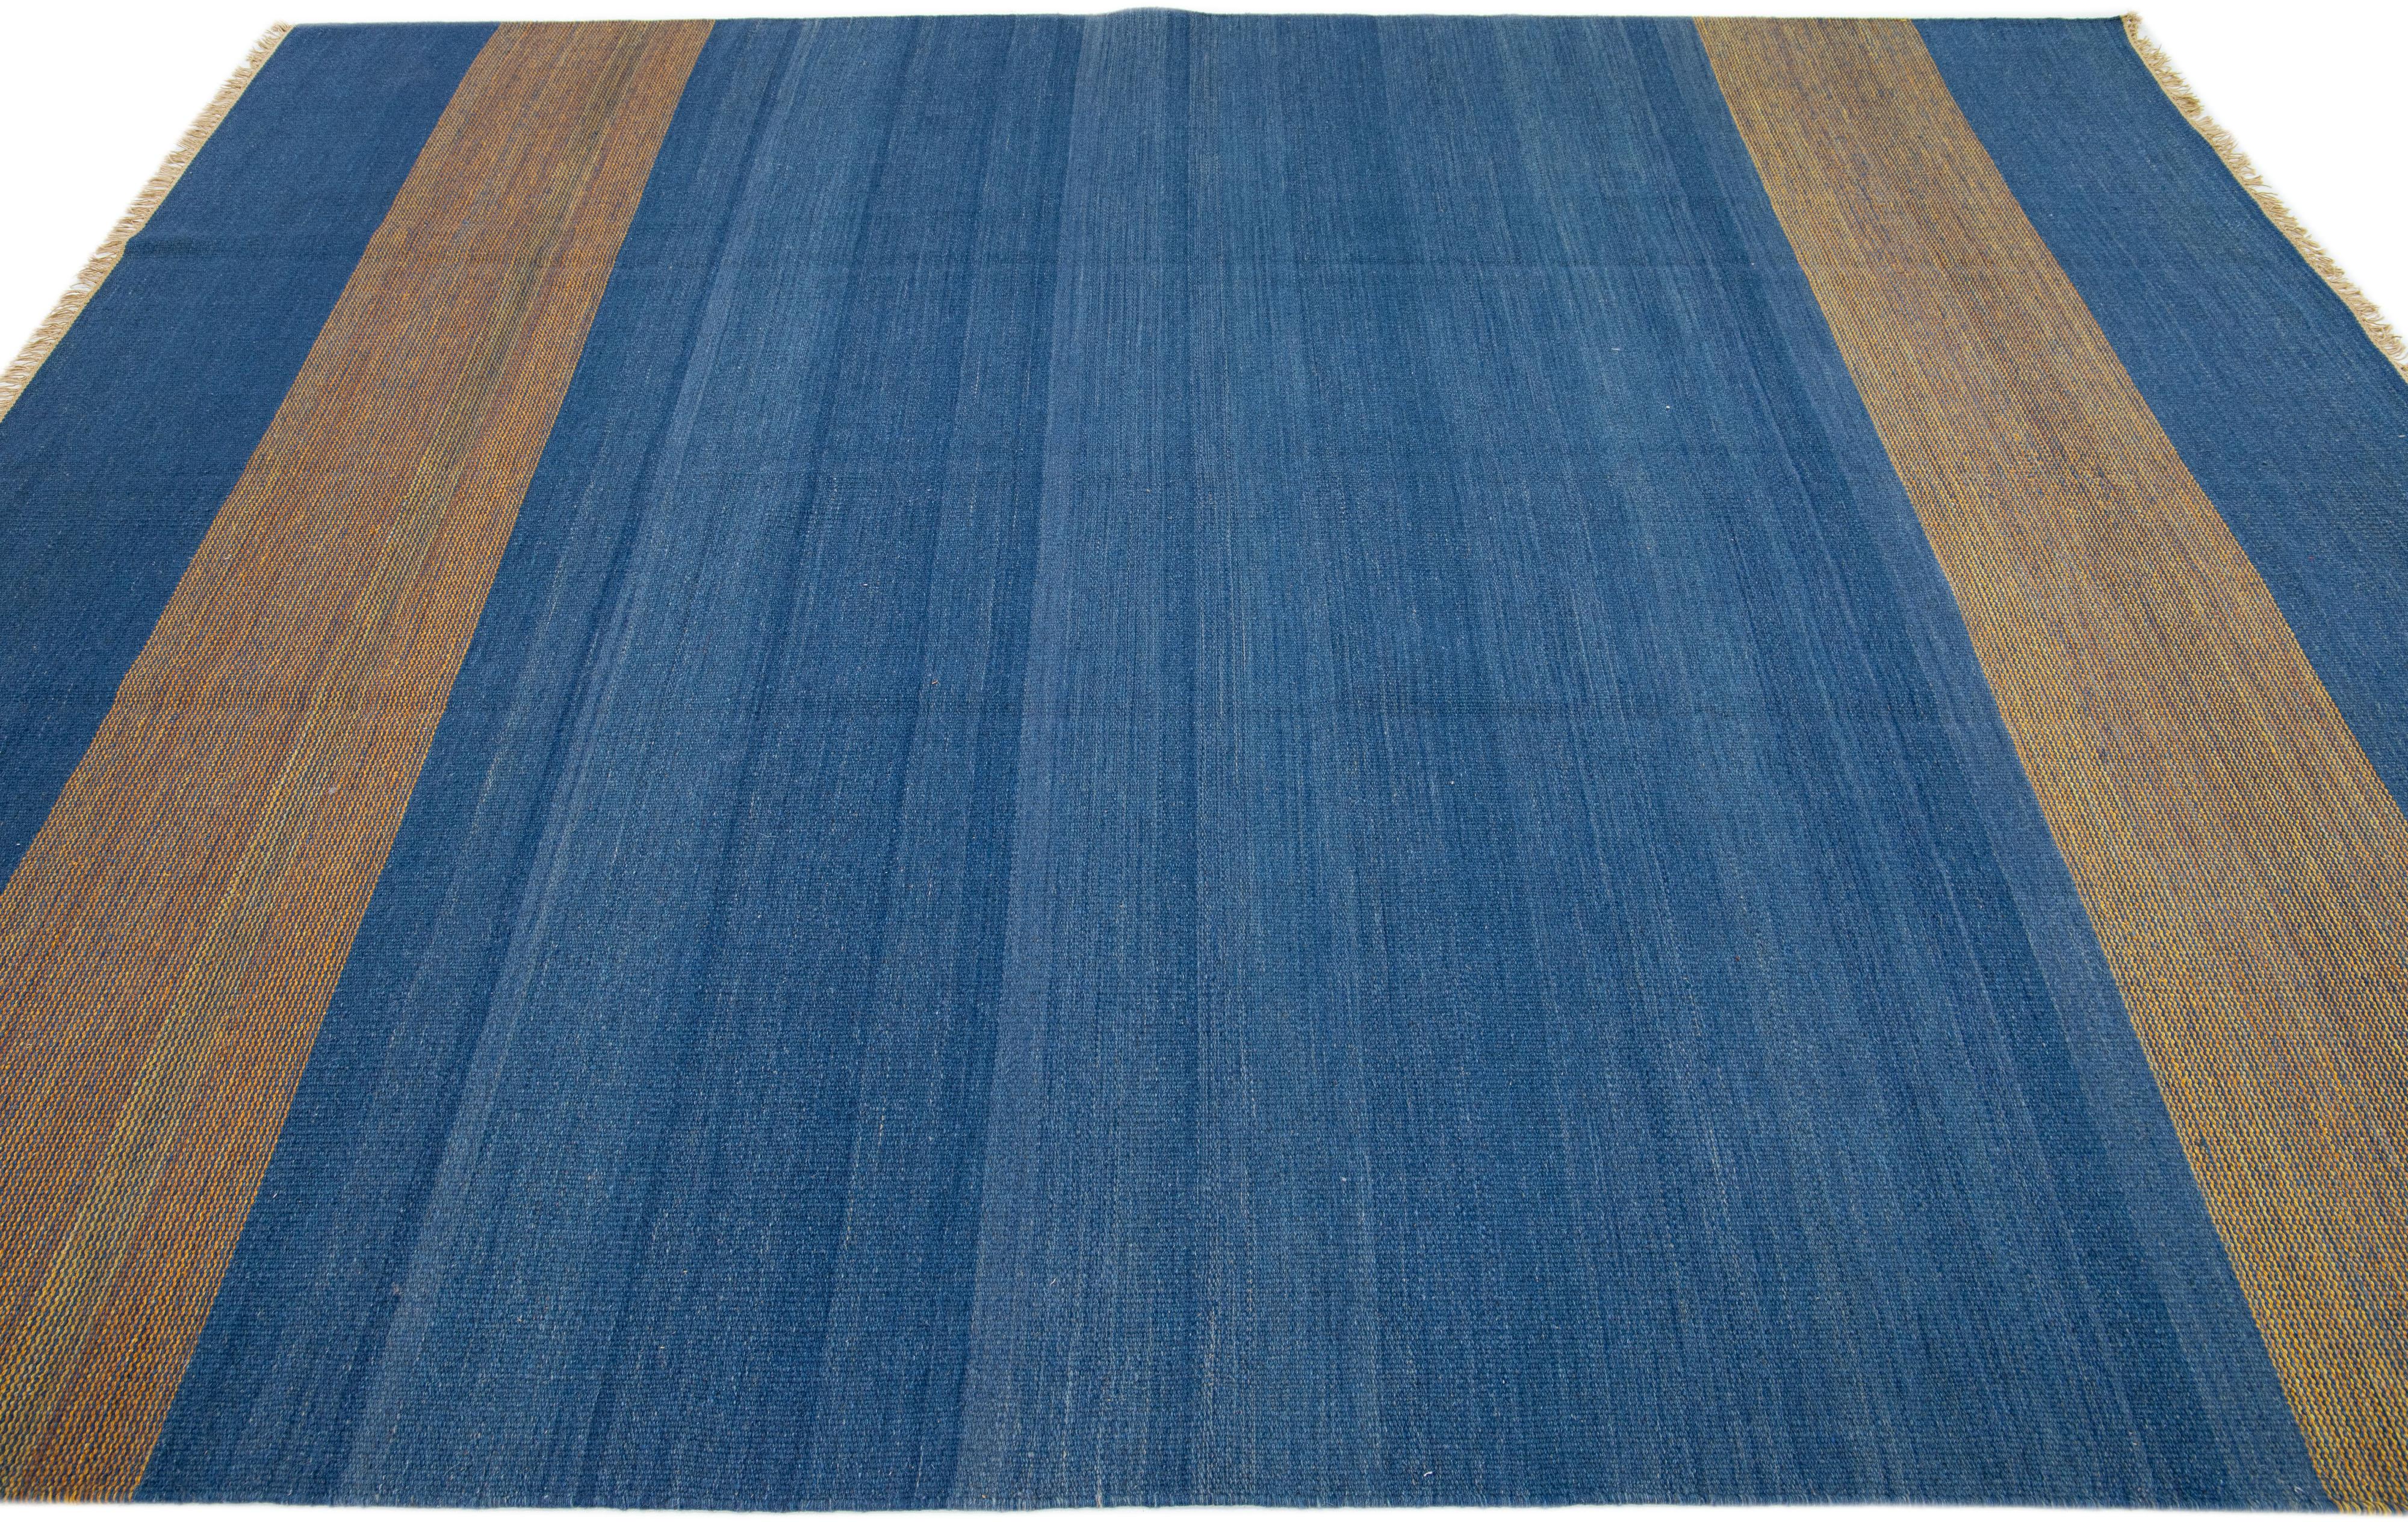 Blue Flatweave Modern Turkish Kilim Wool Rug with Minimalist Design In New Condition For Sale In Norwalk, CT